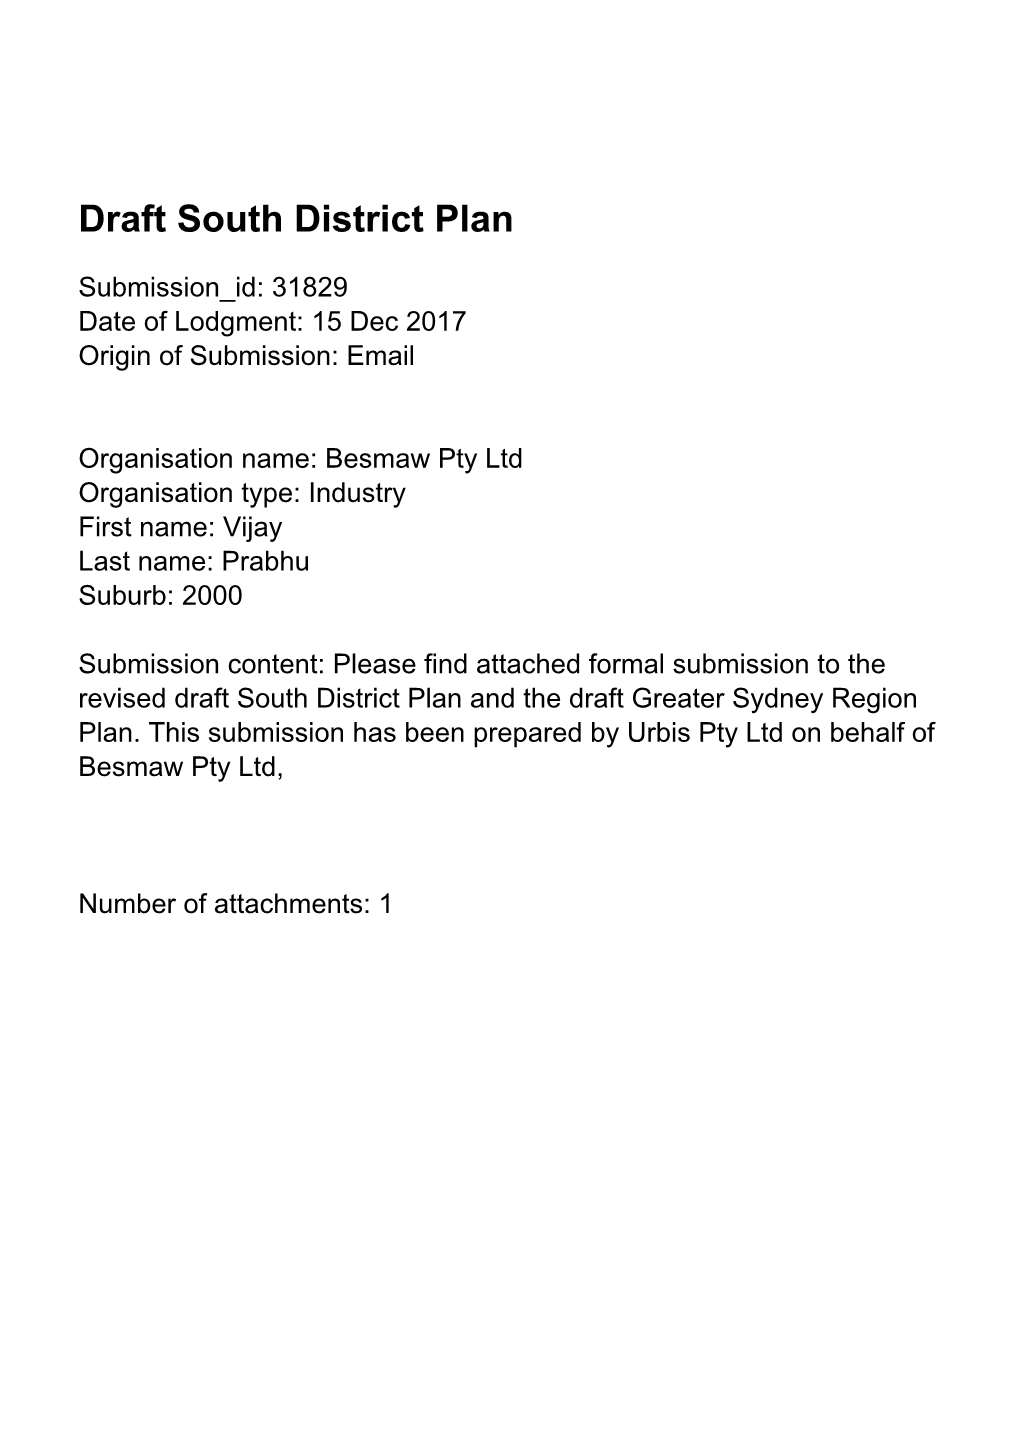 Submission to the Draft South District Plan: Nos. 251 and 280-282 Captain Cook Drive, Kurnell Peninsula